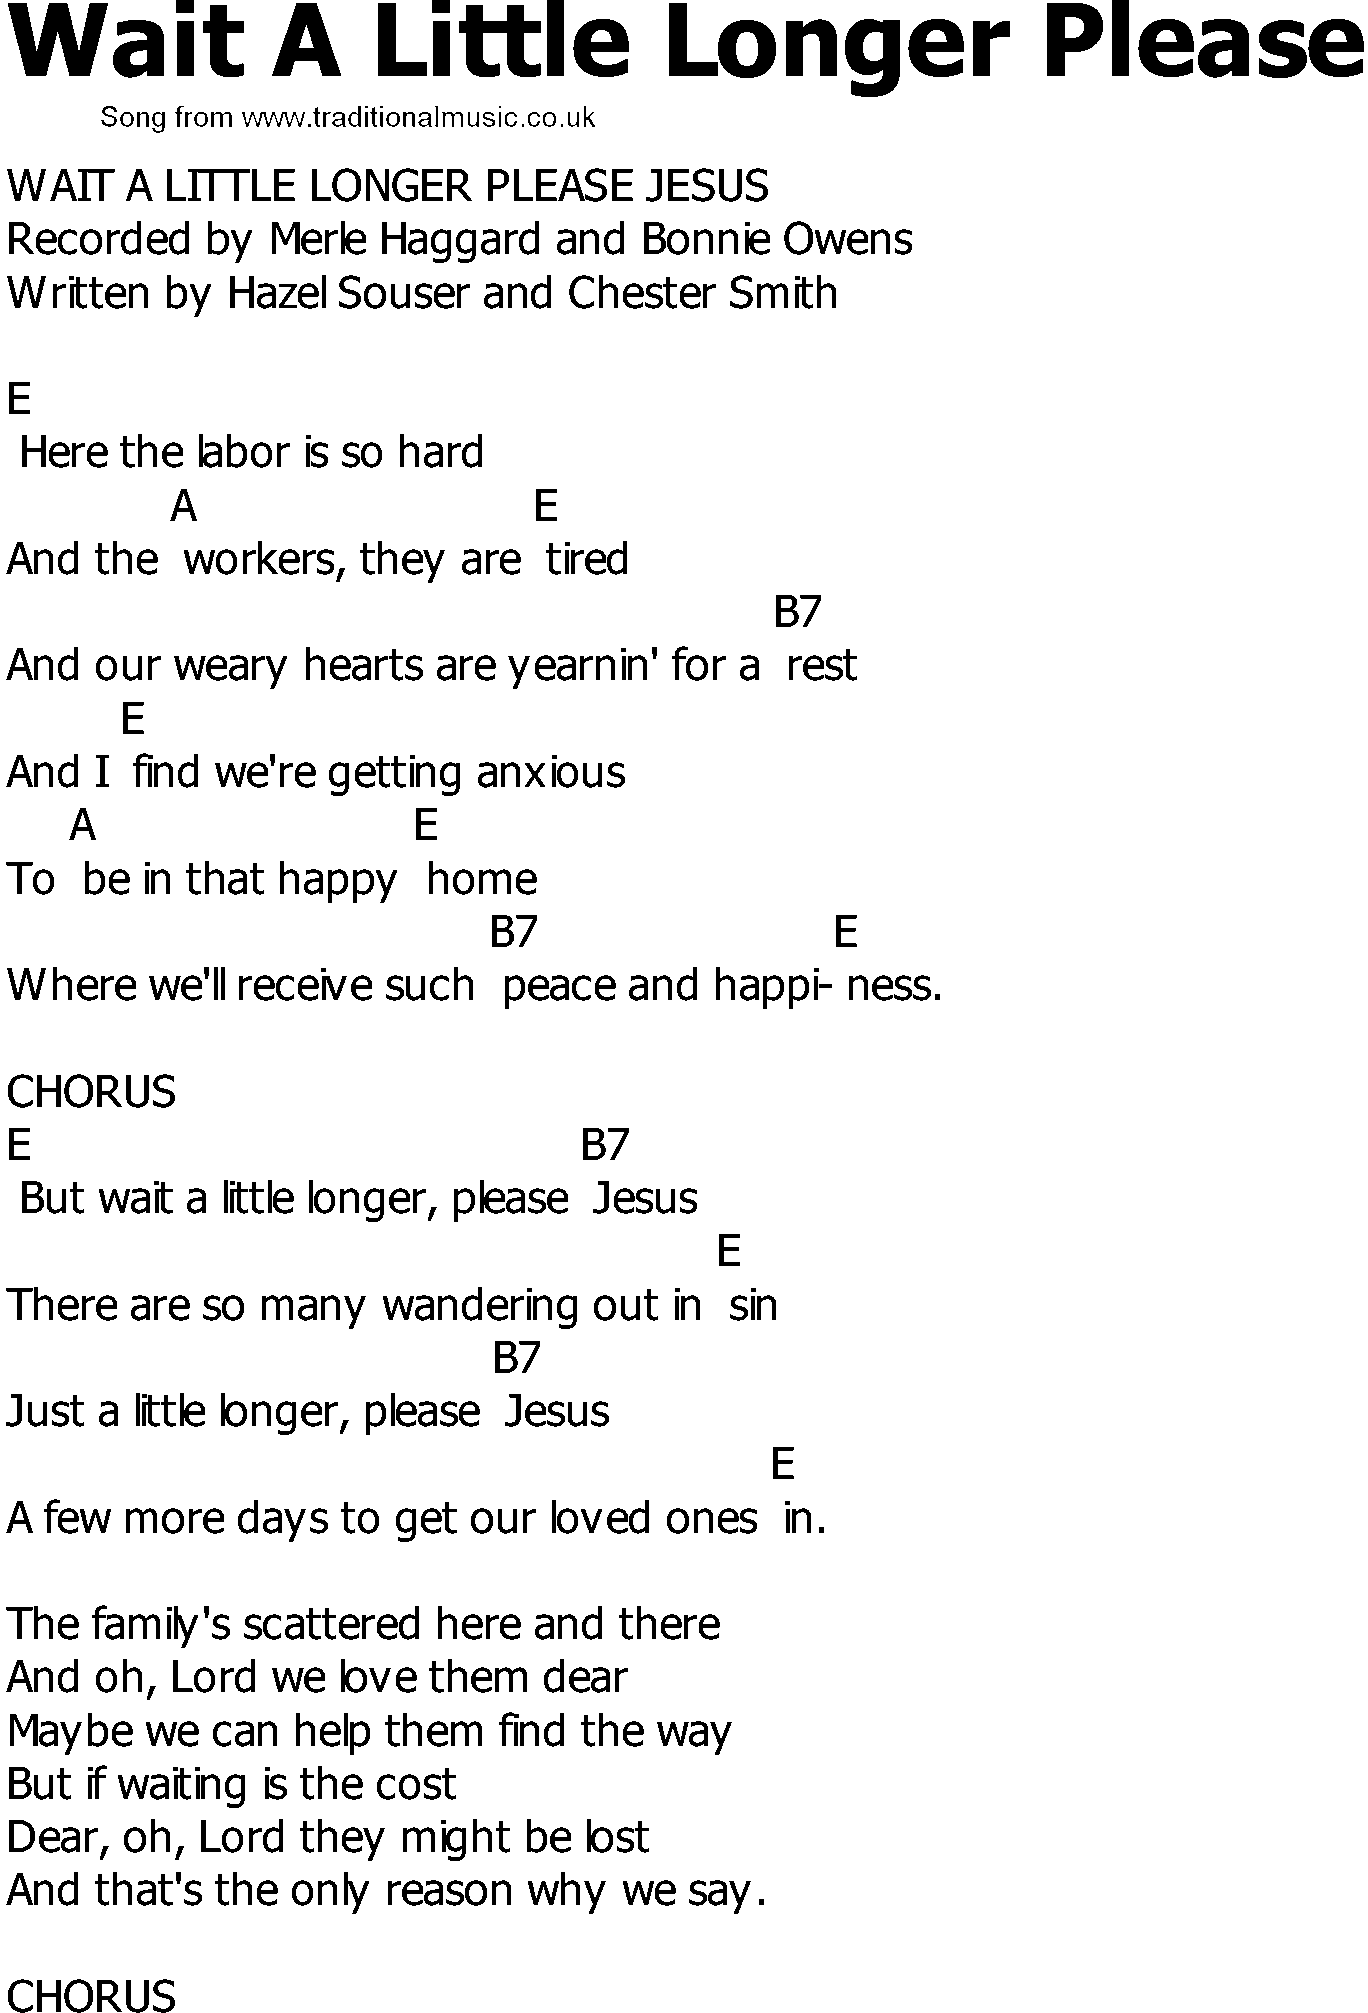 Old Country song lyrics with chords - Wait A Little Longer Please